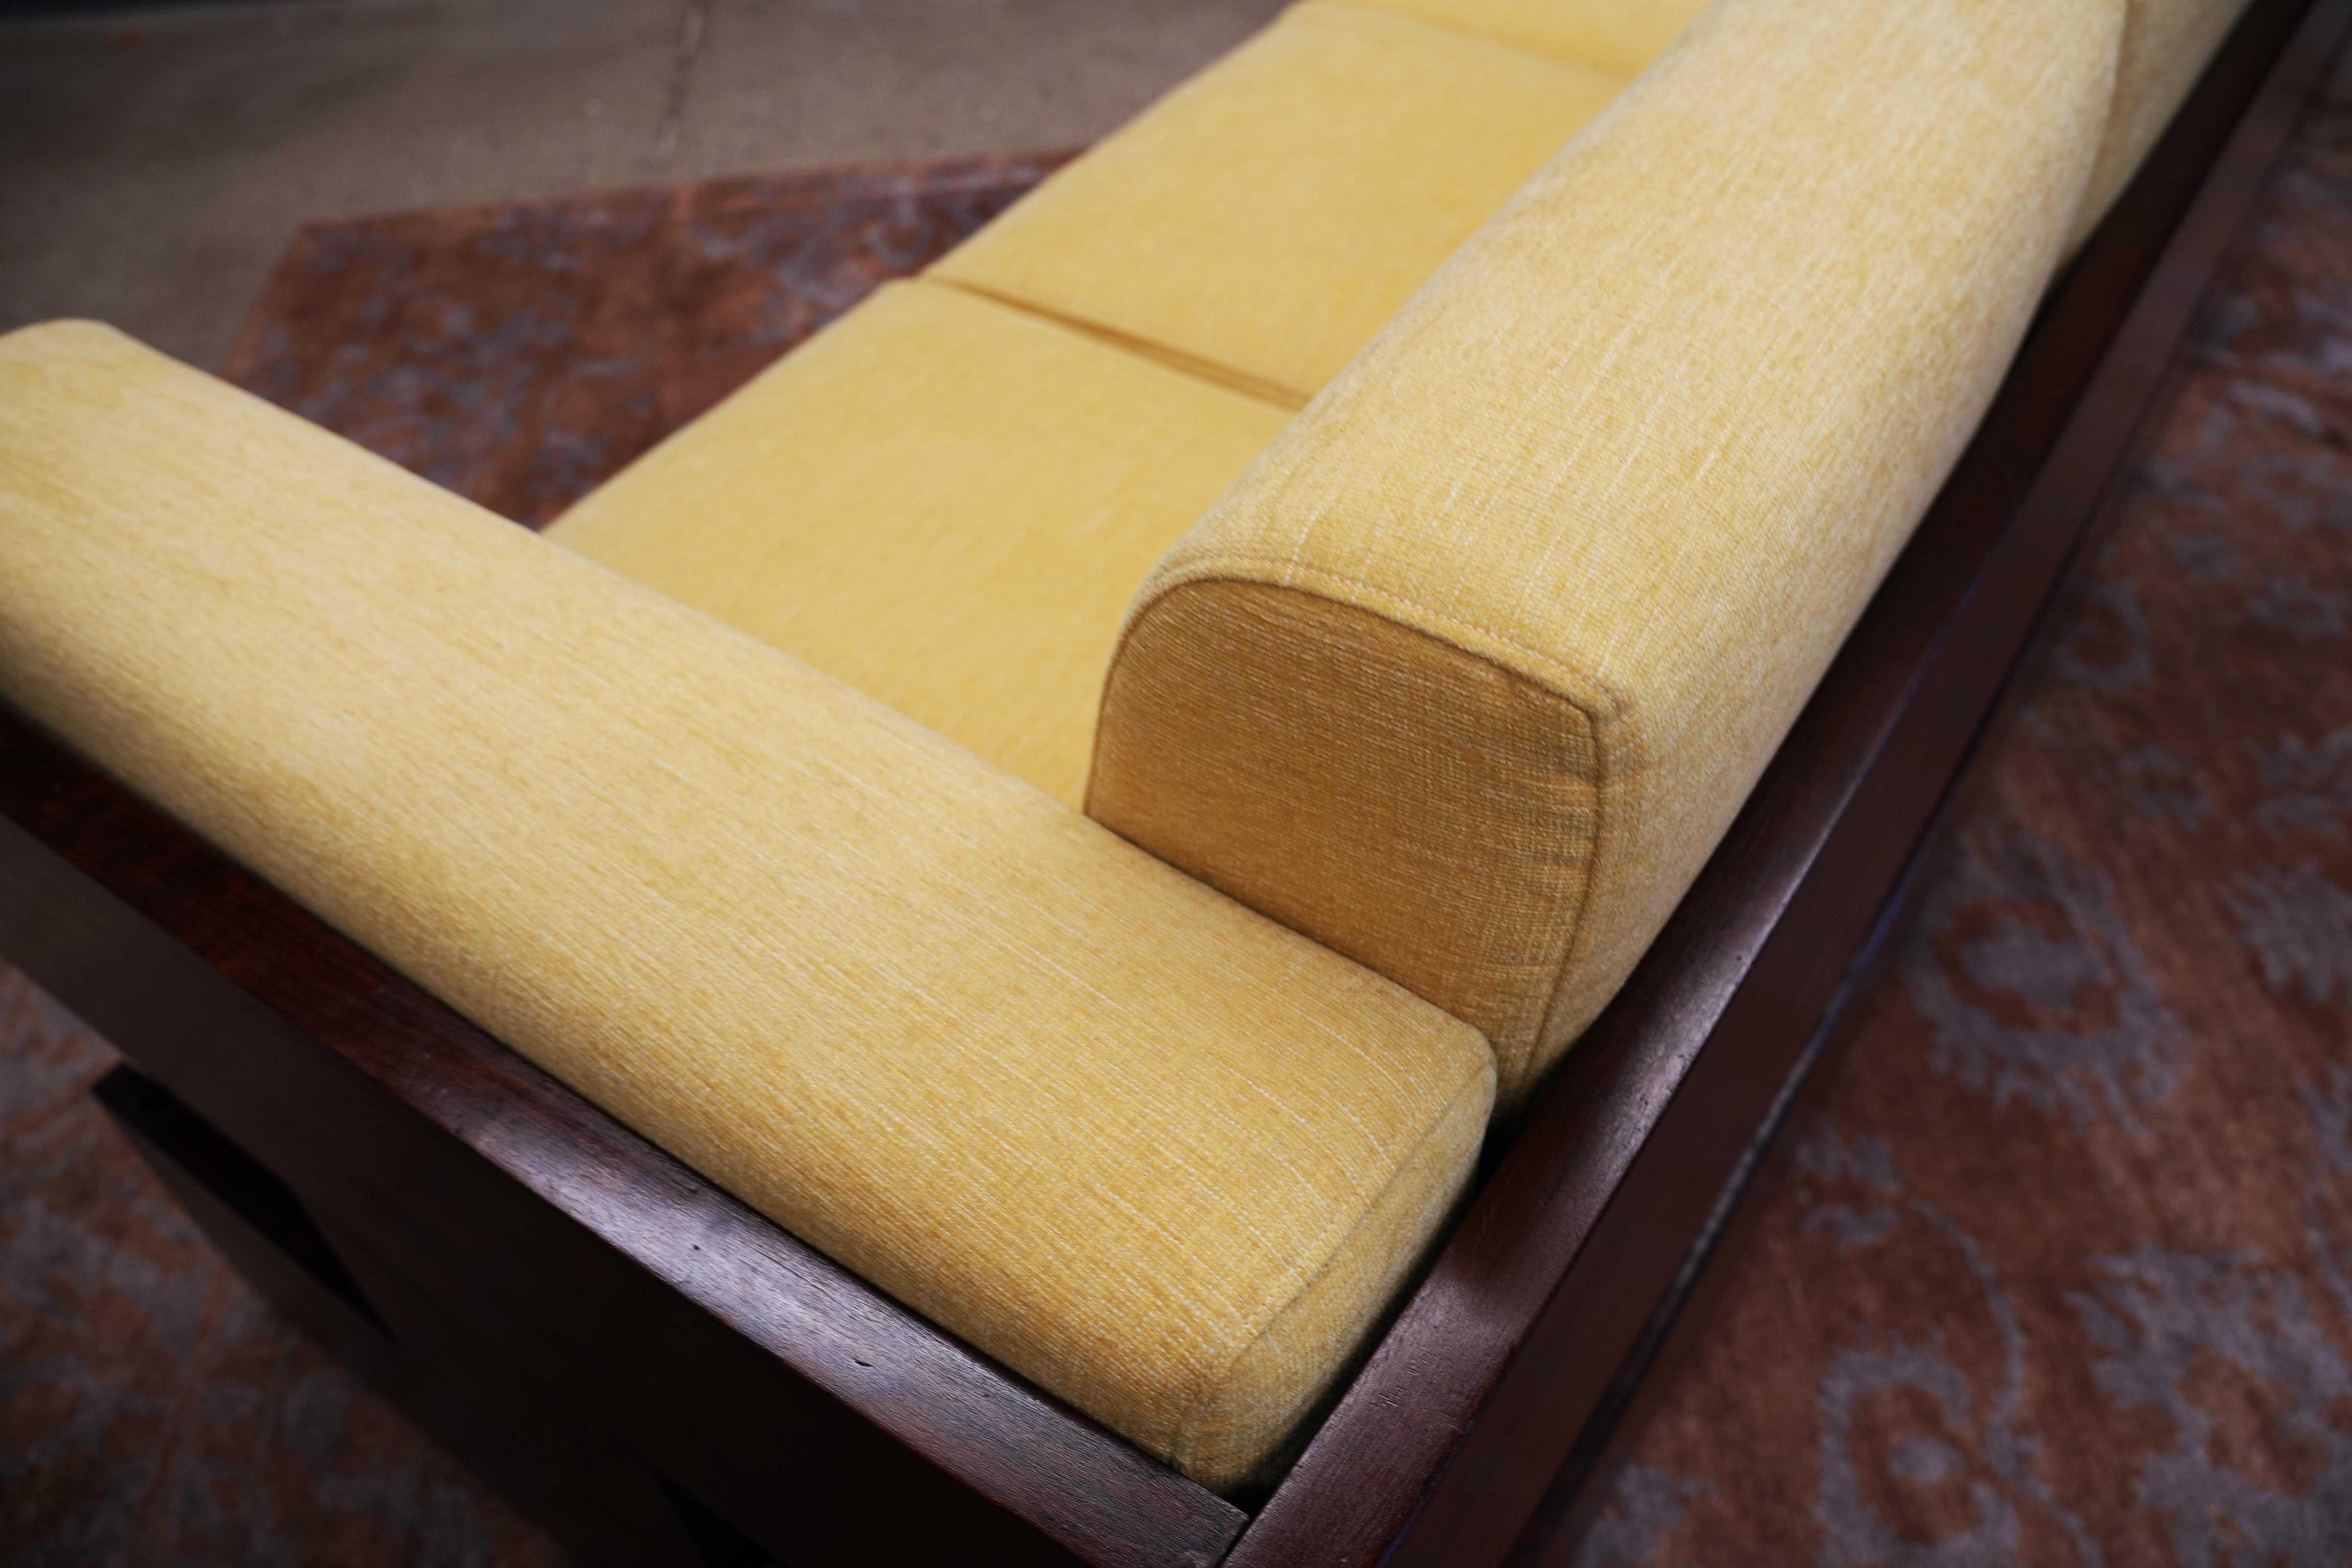 Brazilian Modern Sofa in Hardwood and Yellow Chenille by Celina, Brazil, c. 1960 In Good Condition For Sale In New York, NY